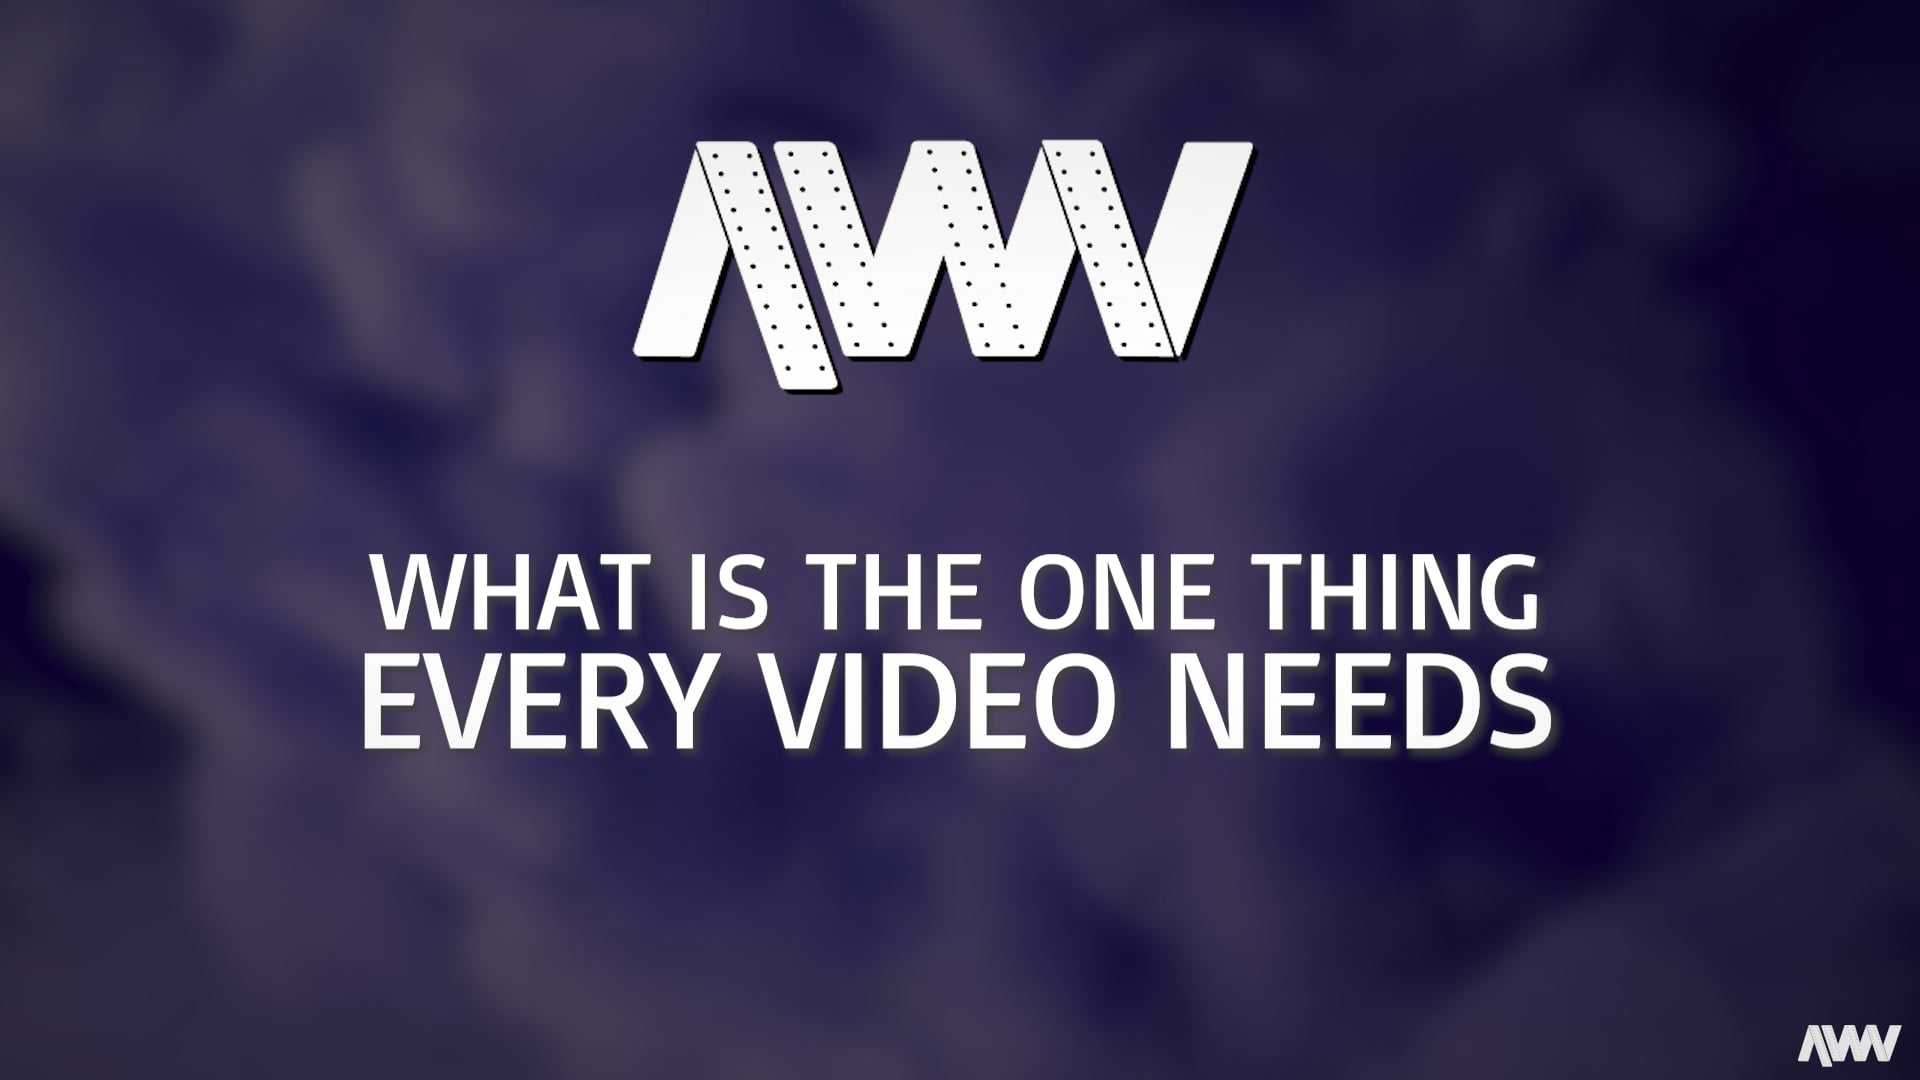 What Is the One Thing Every Video Needs?